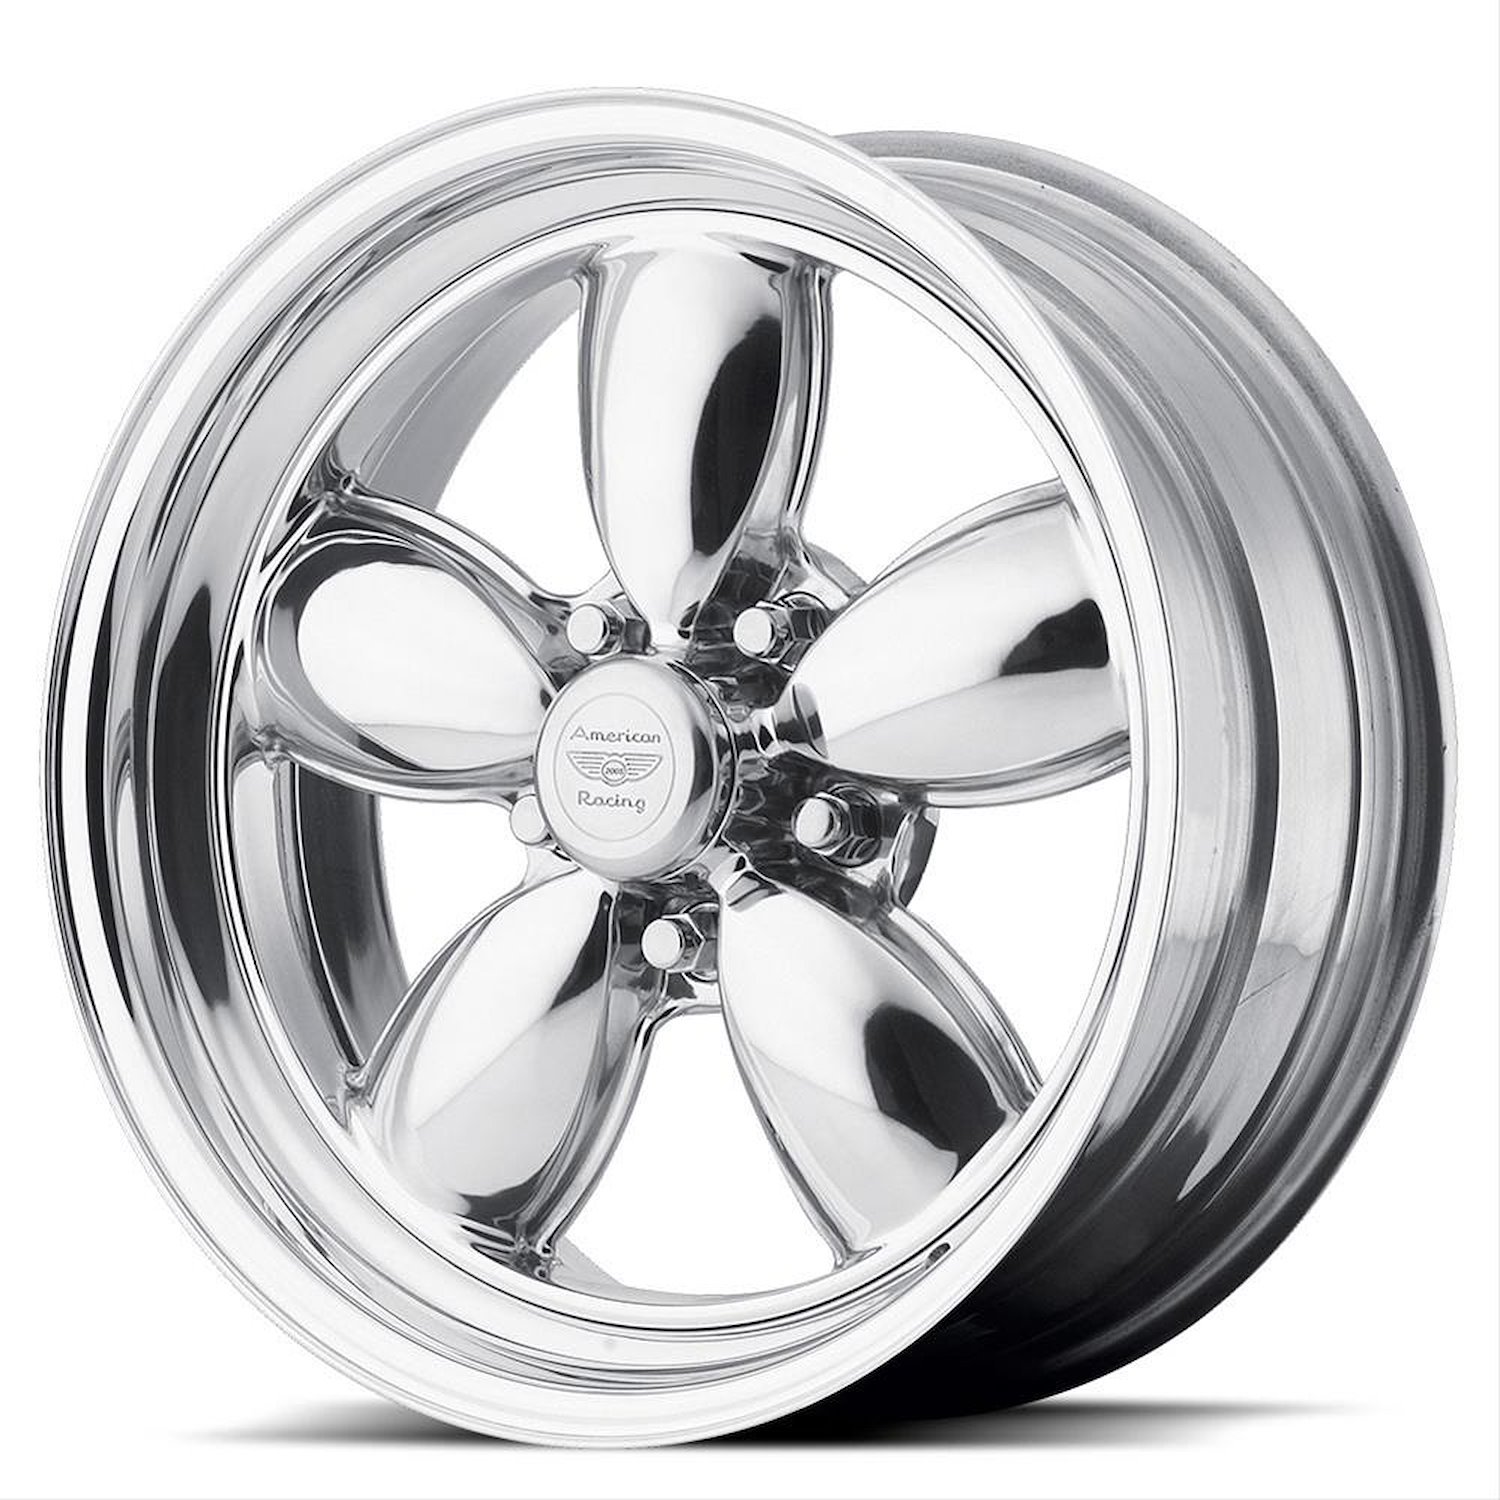 AMERICAN RACING CLASSIC 200S TWO-PIECE POLISHED 17 x 9.5 5x4.5 -13 4.74